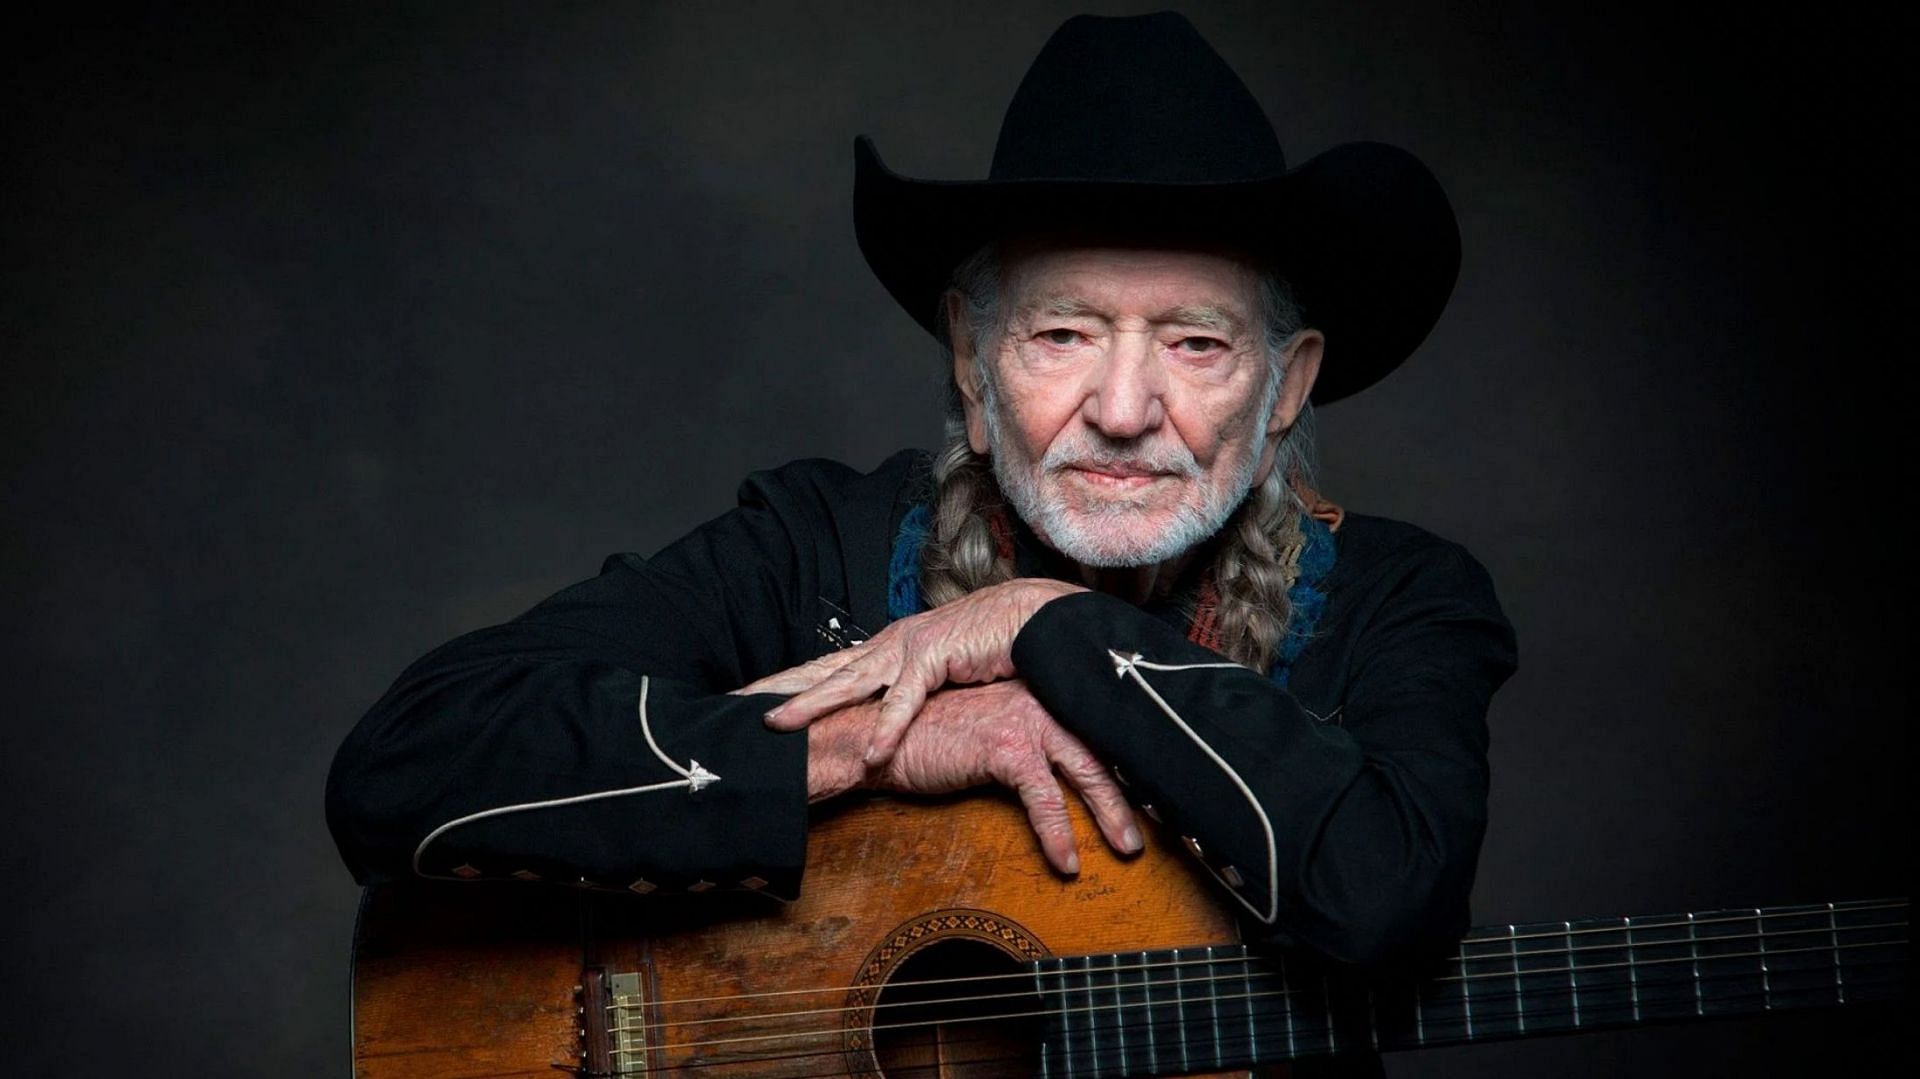 Willie Nelson is slated to perform at various music festivals this year. (Image Garry Miller via Getty)